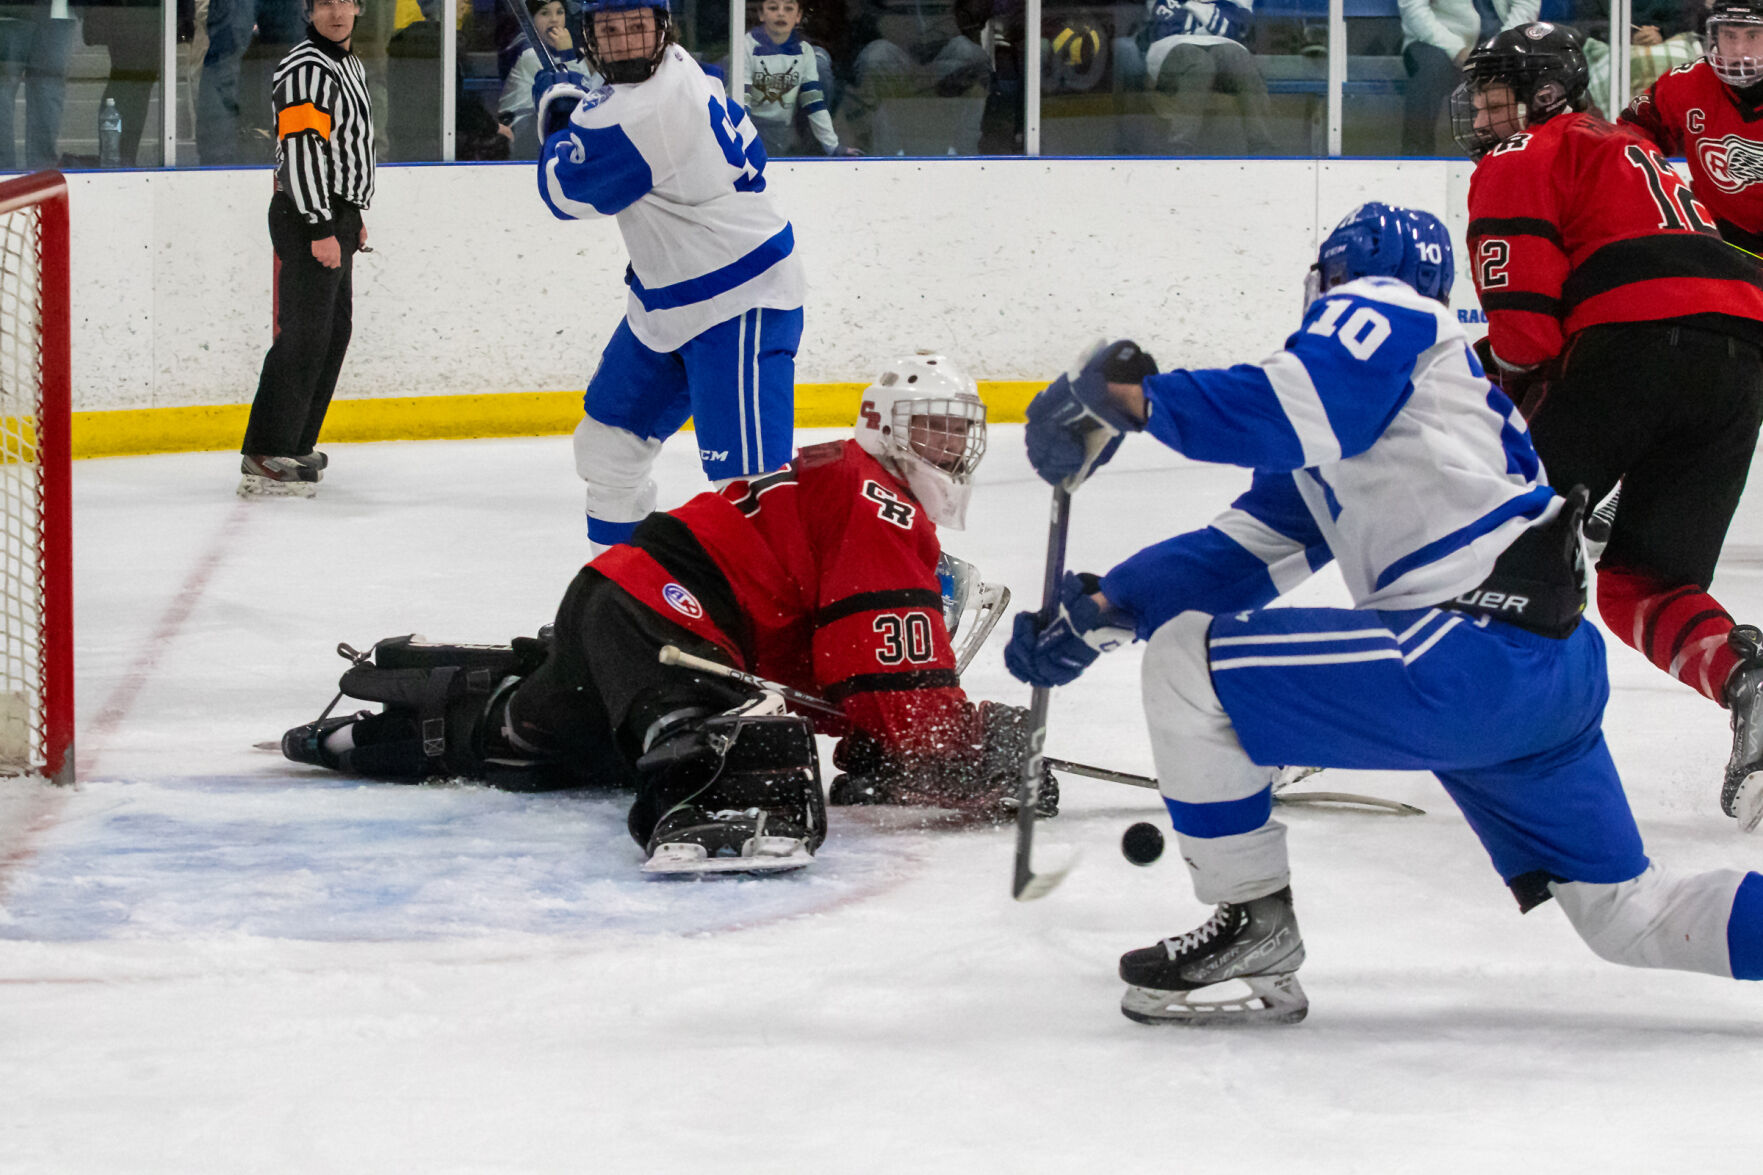 Rogers boys hockey defeats Coon Rapids in section quarterfinals